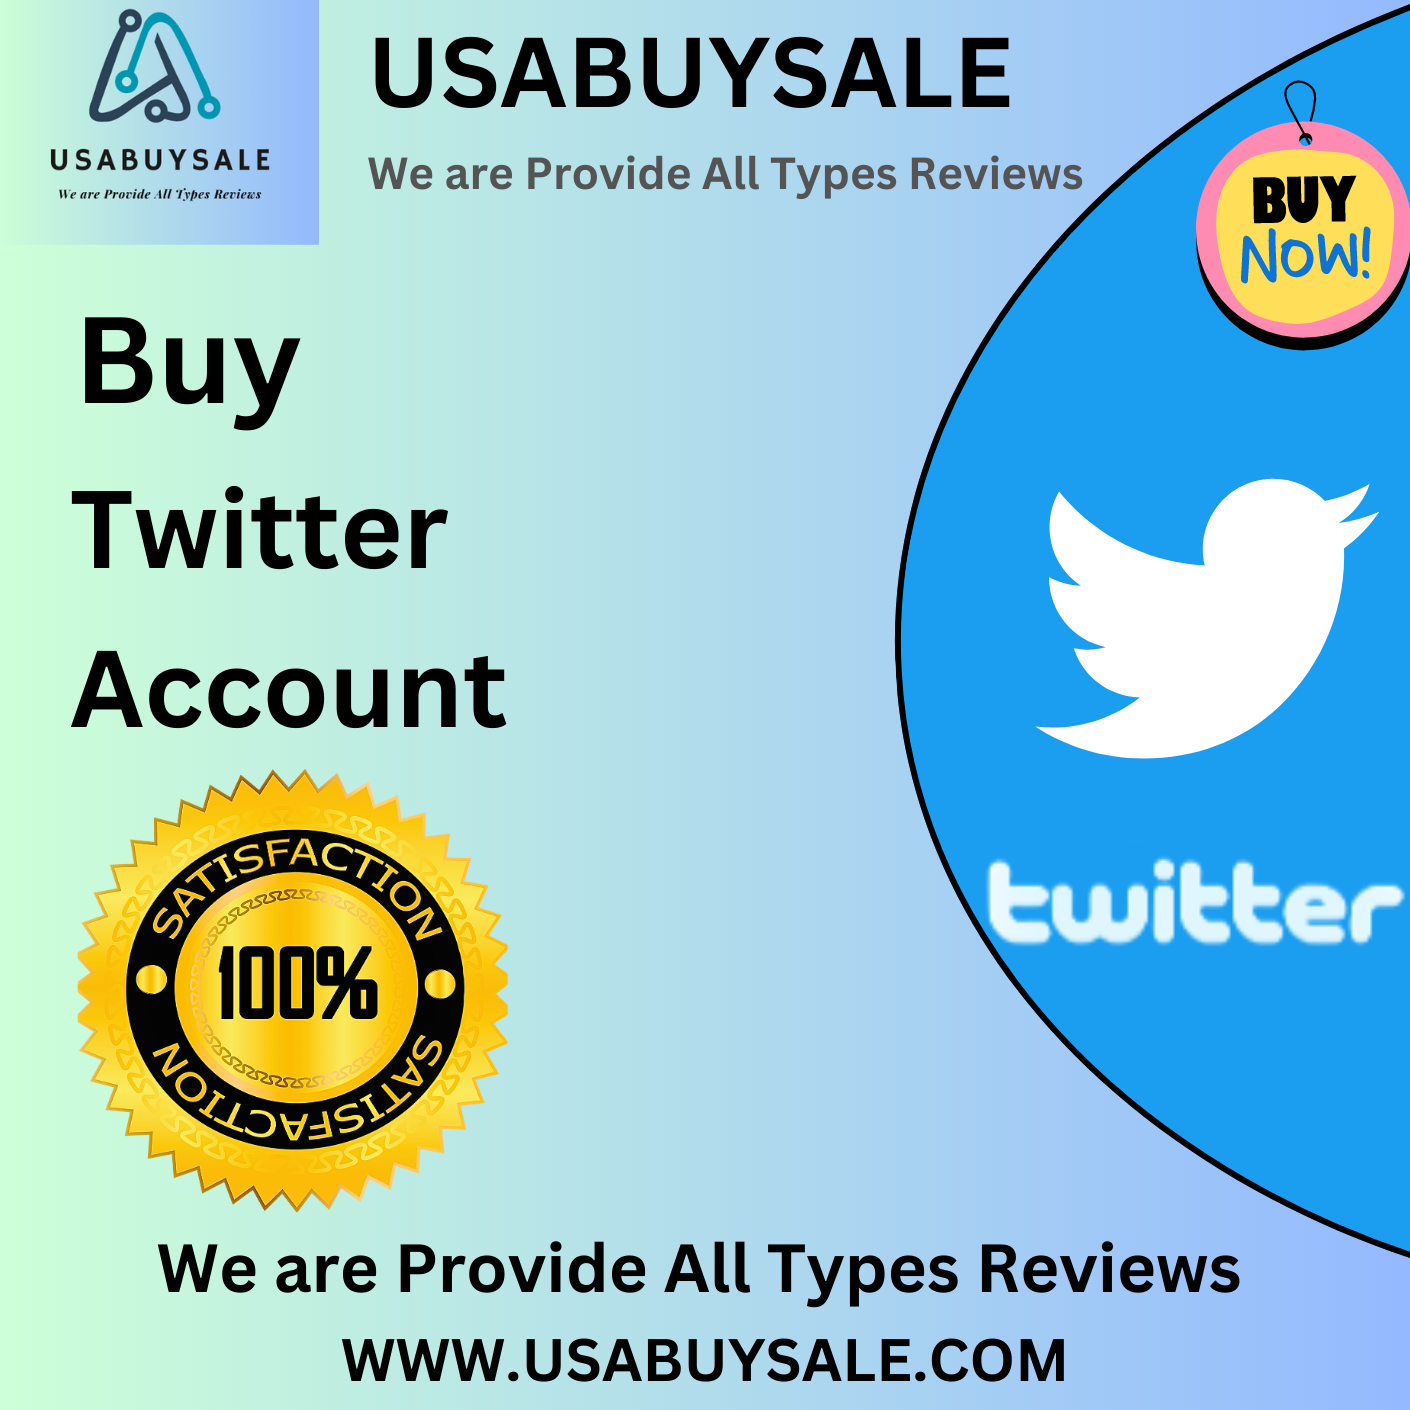 Buy Twitter Account - 100% Old and New Account IN USA